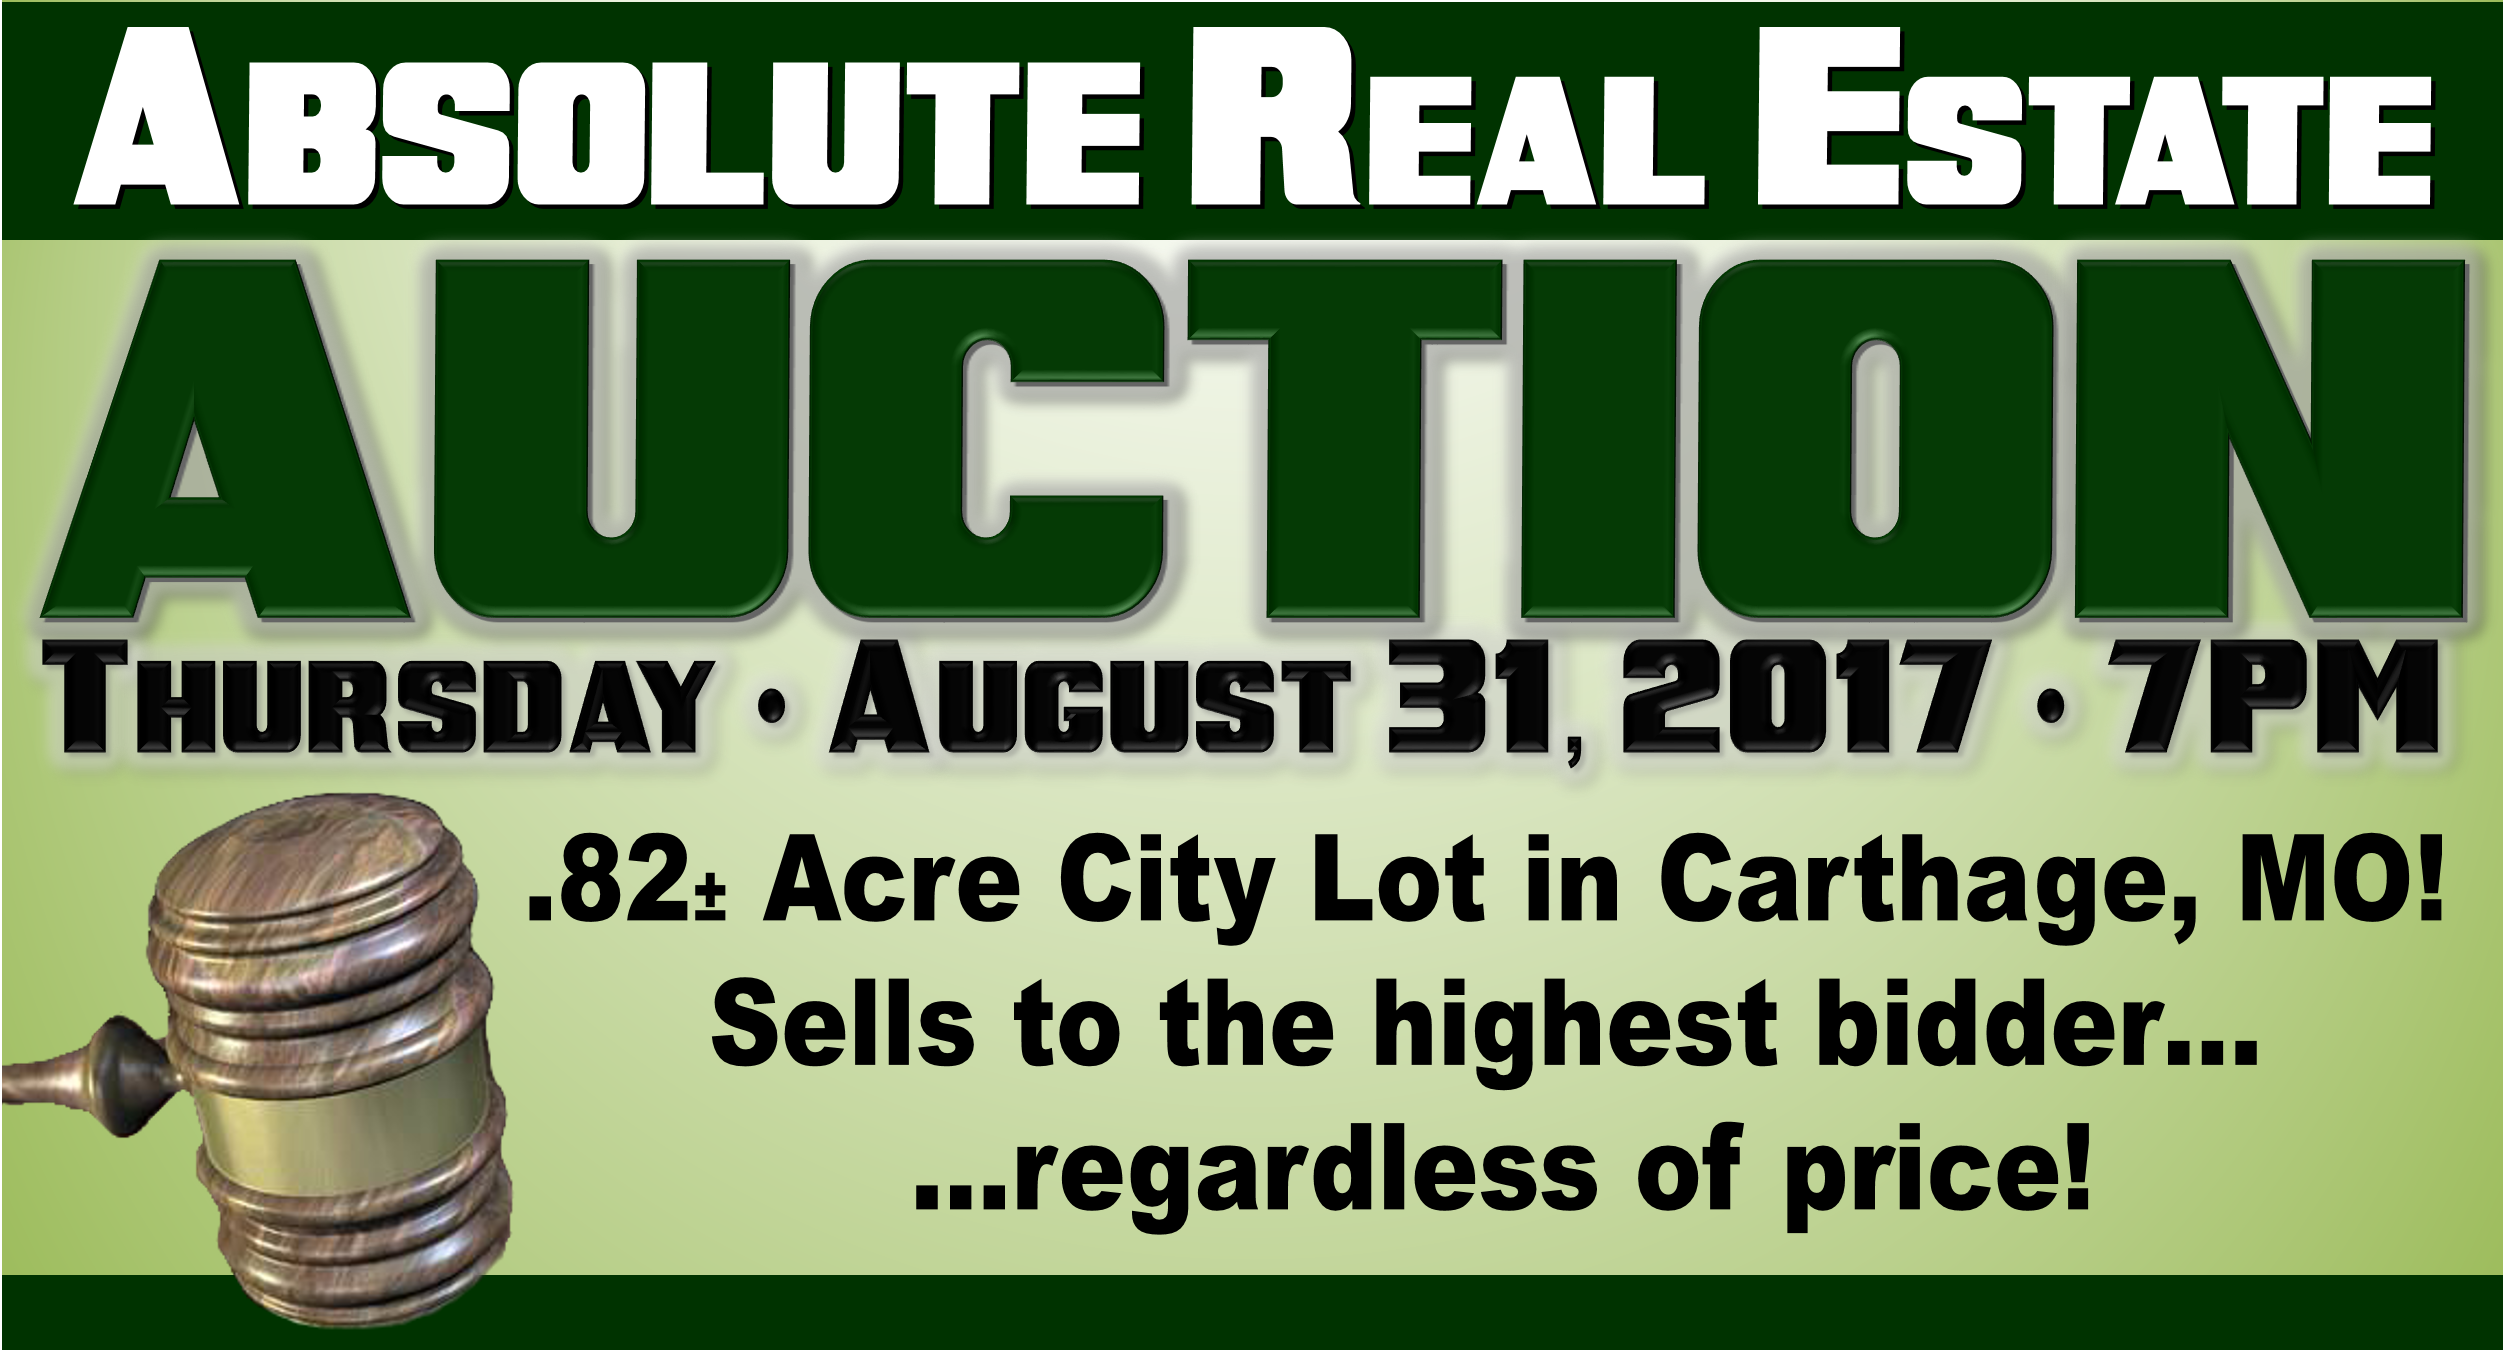 ABSOLUTE REAL ESTATE AUCTION